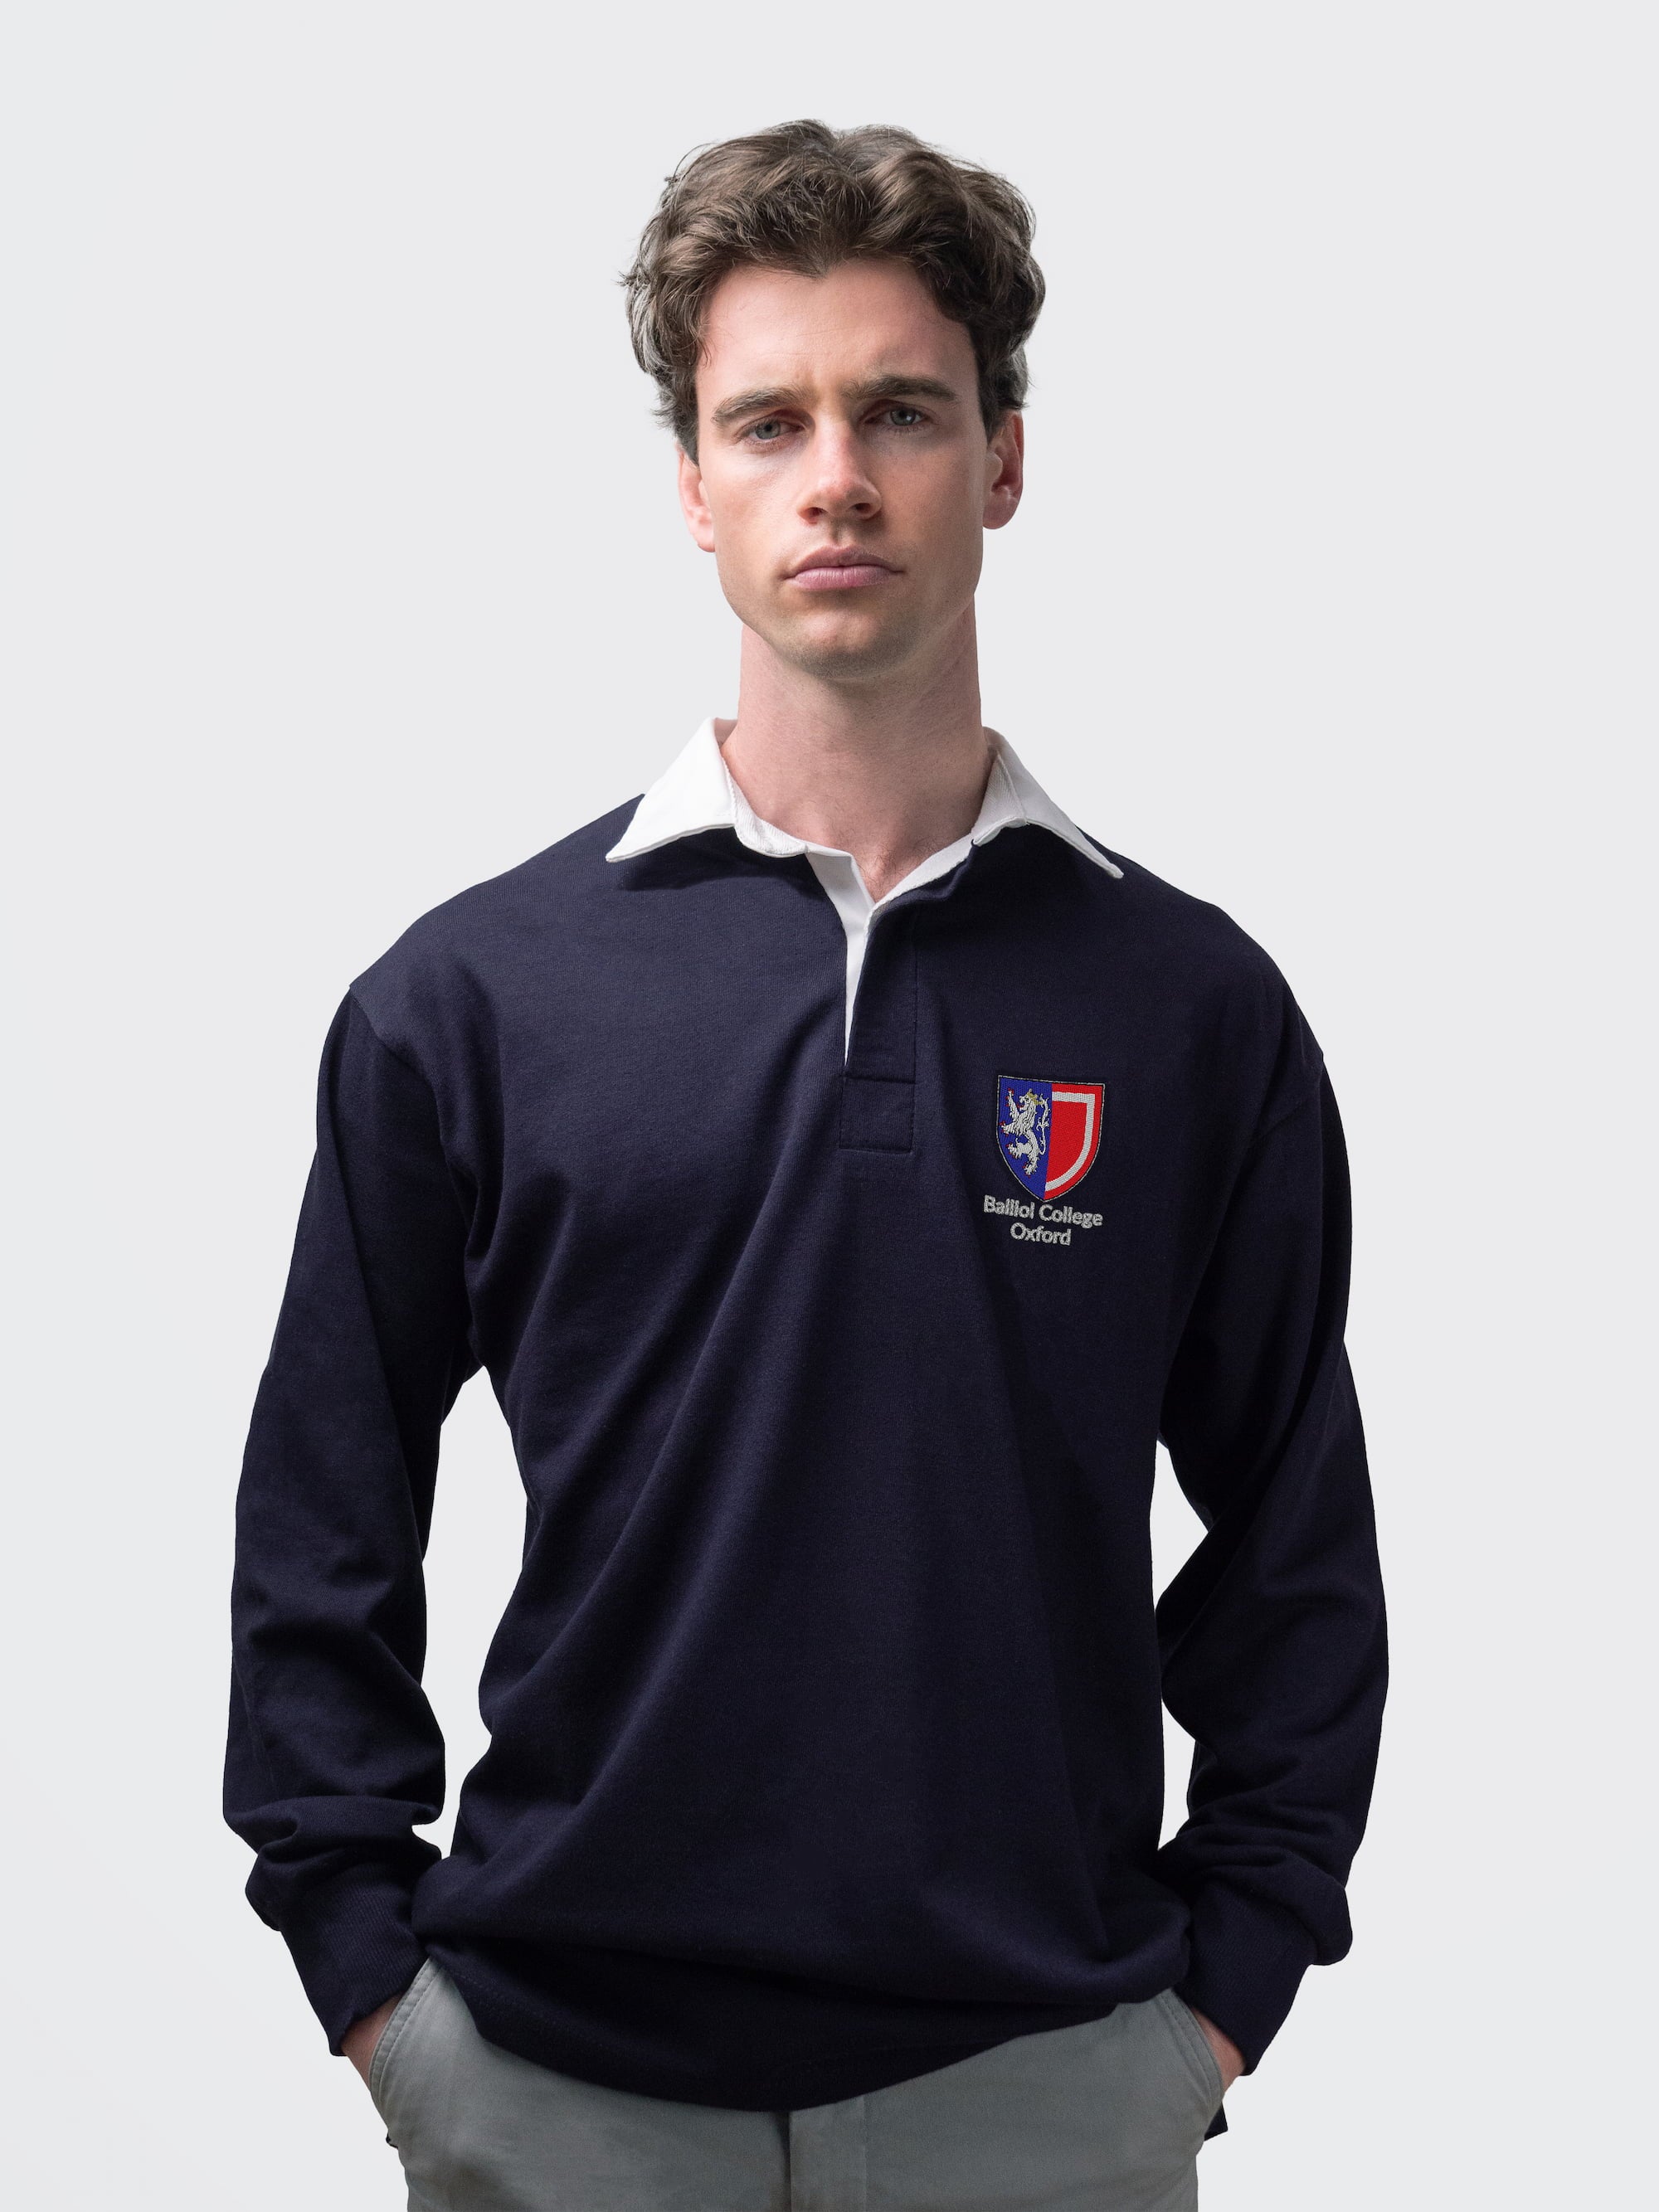 Balliol student wearing an embroidered mens rugby shirt in navy